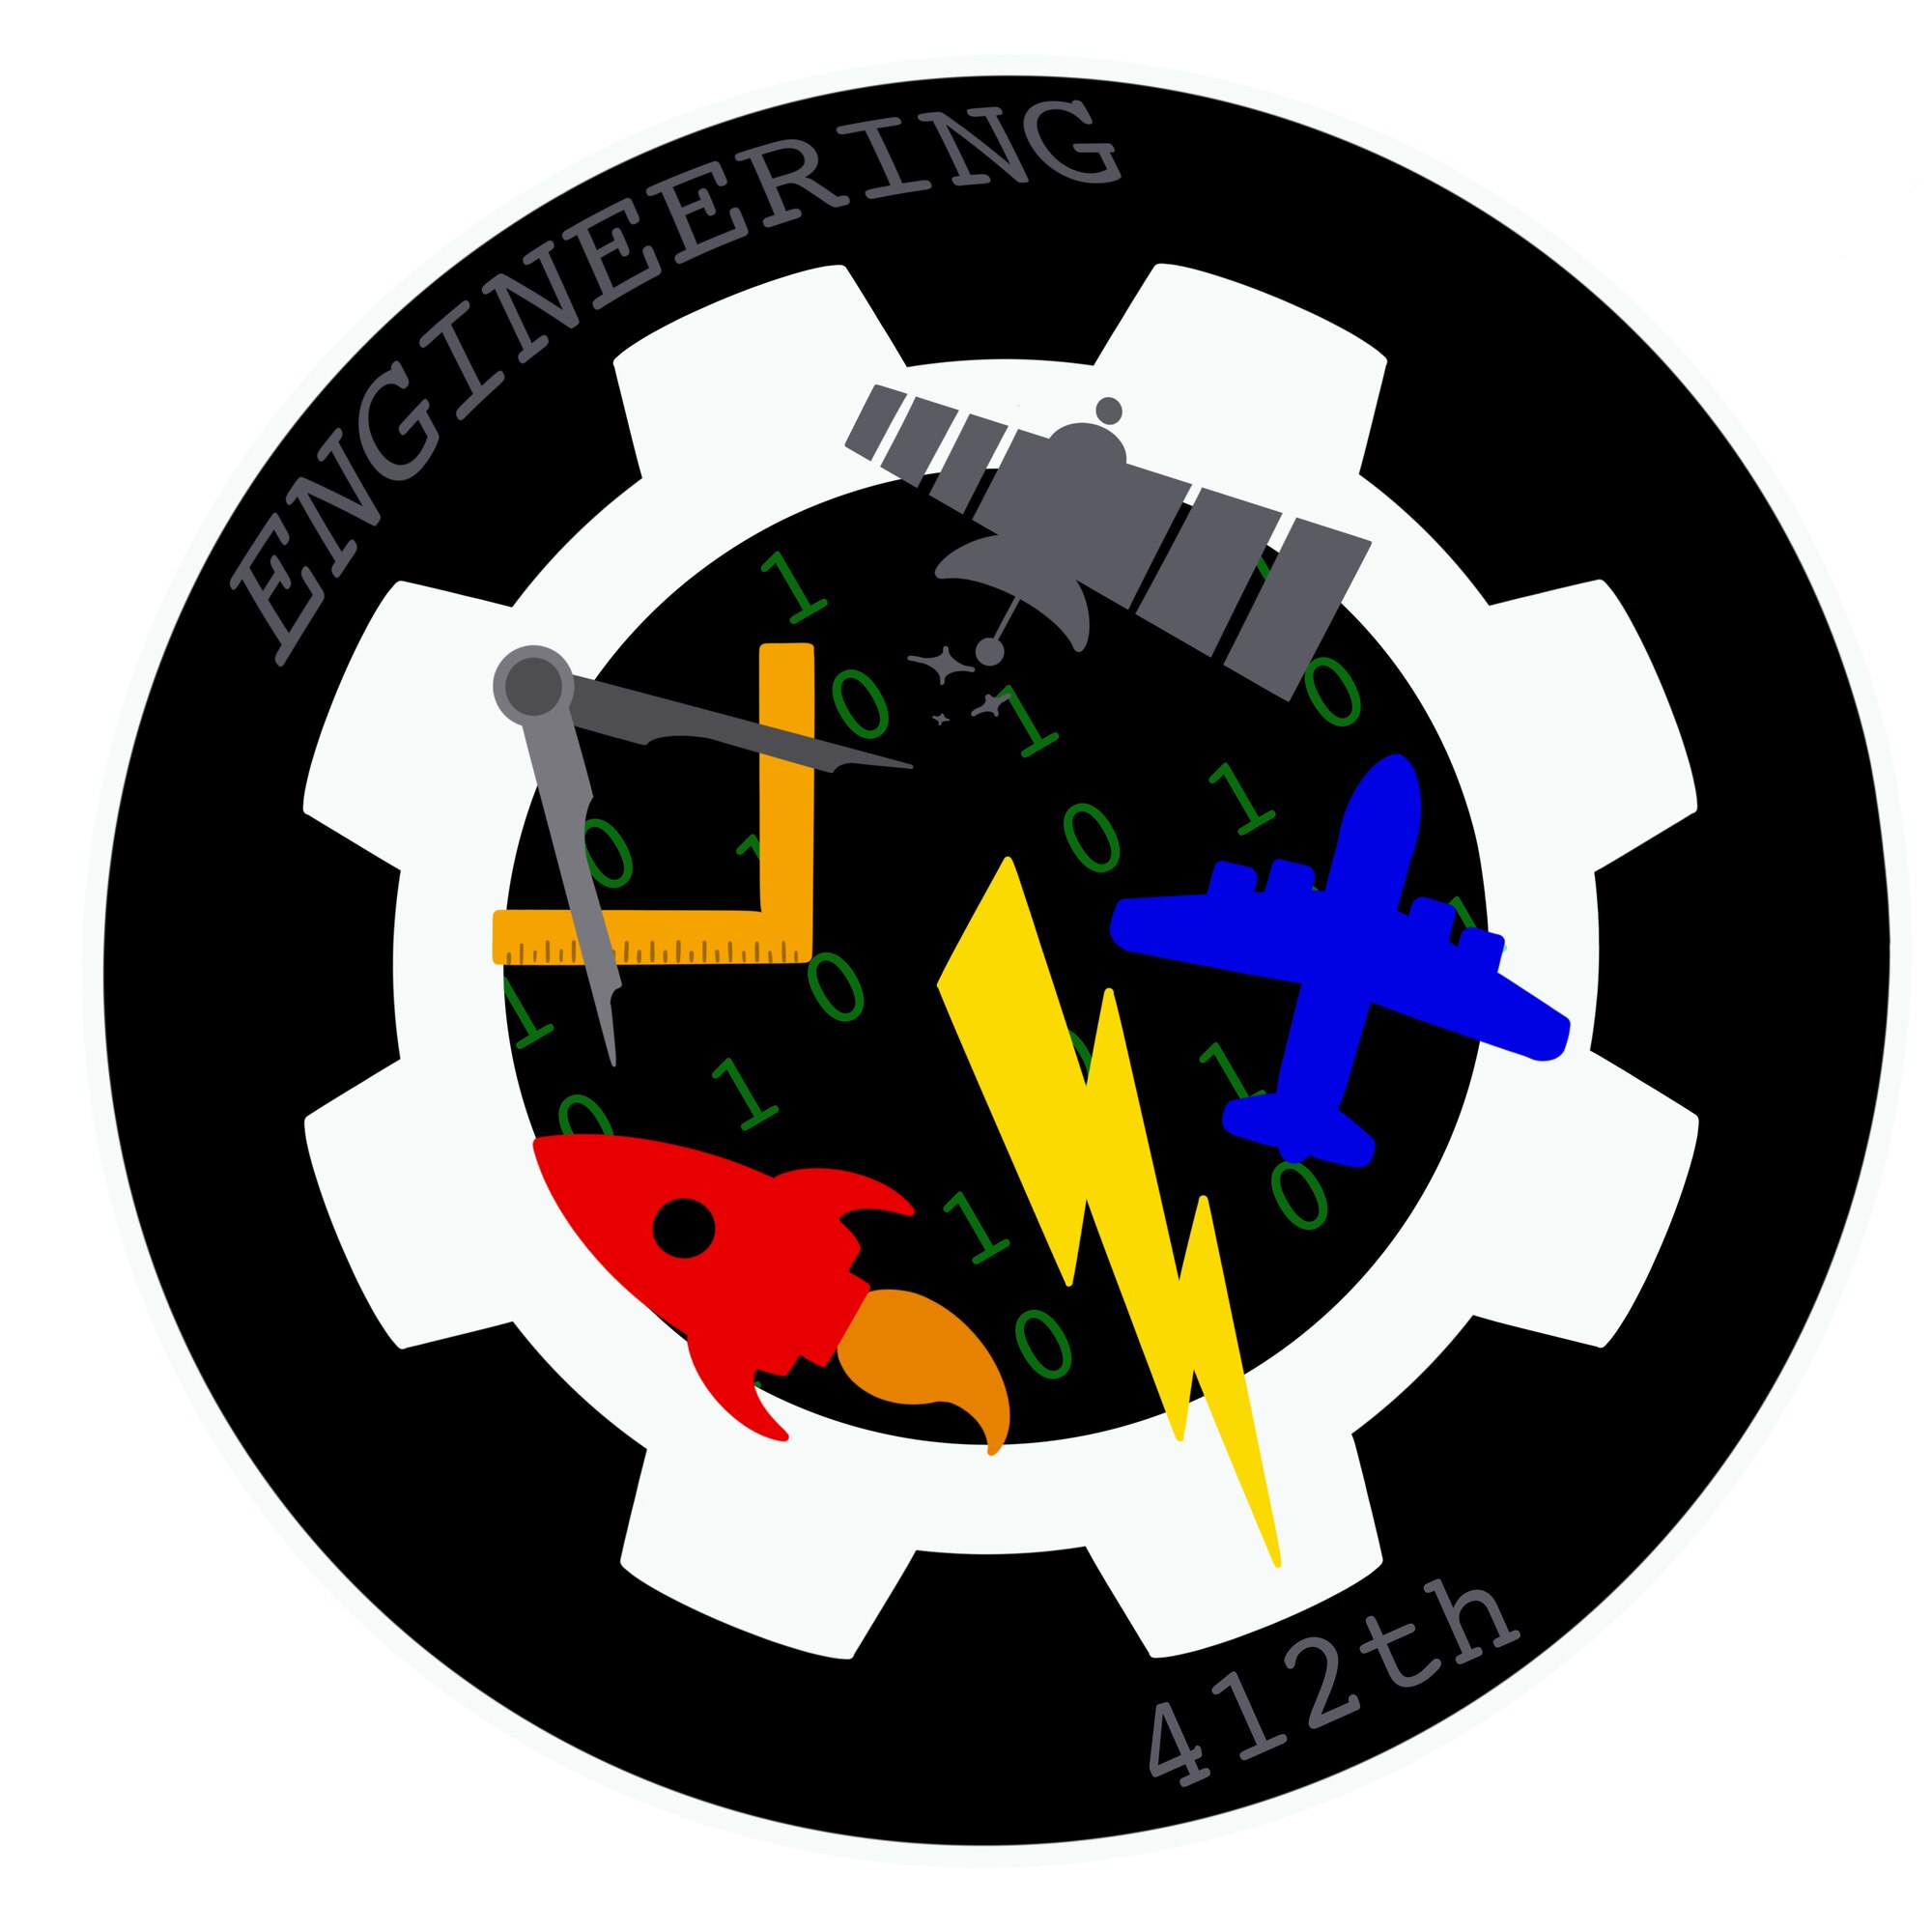 In recognition of Engineers Week 2022, base engineers held a patch designing contest and selected this design, created by Sandra Peters, 812th Aircraft Instrumentation Test Squadron